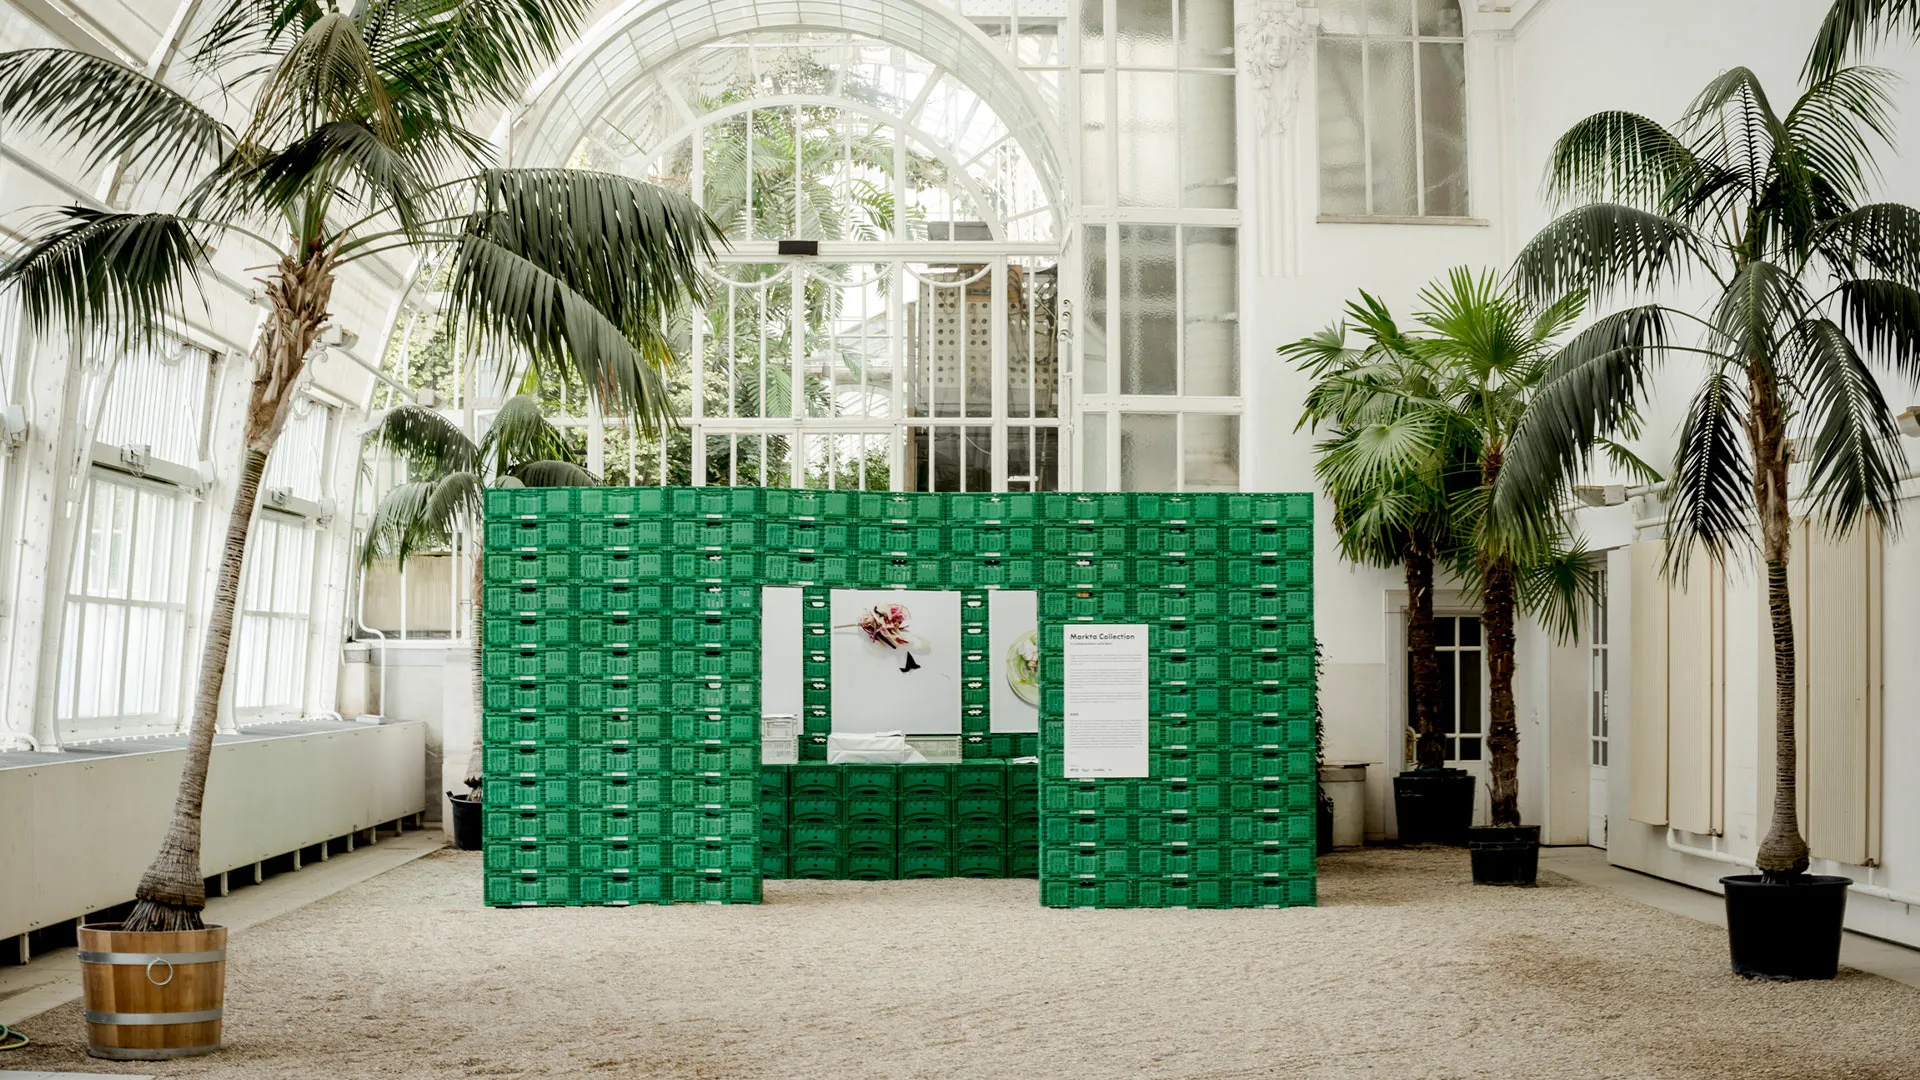 Palmenhaus in Wien with a design project